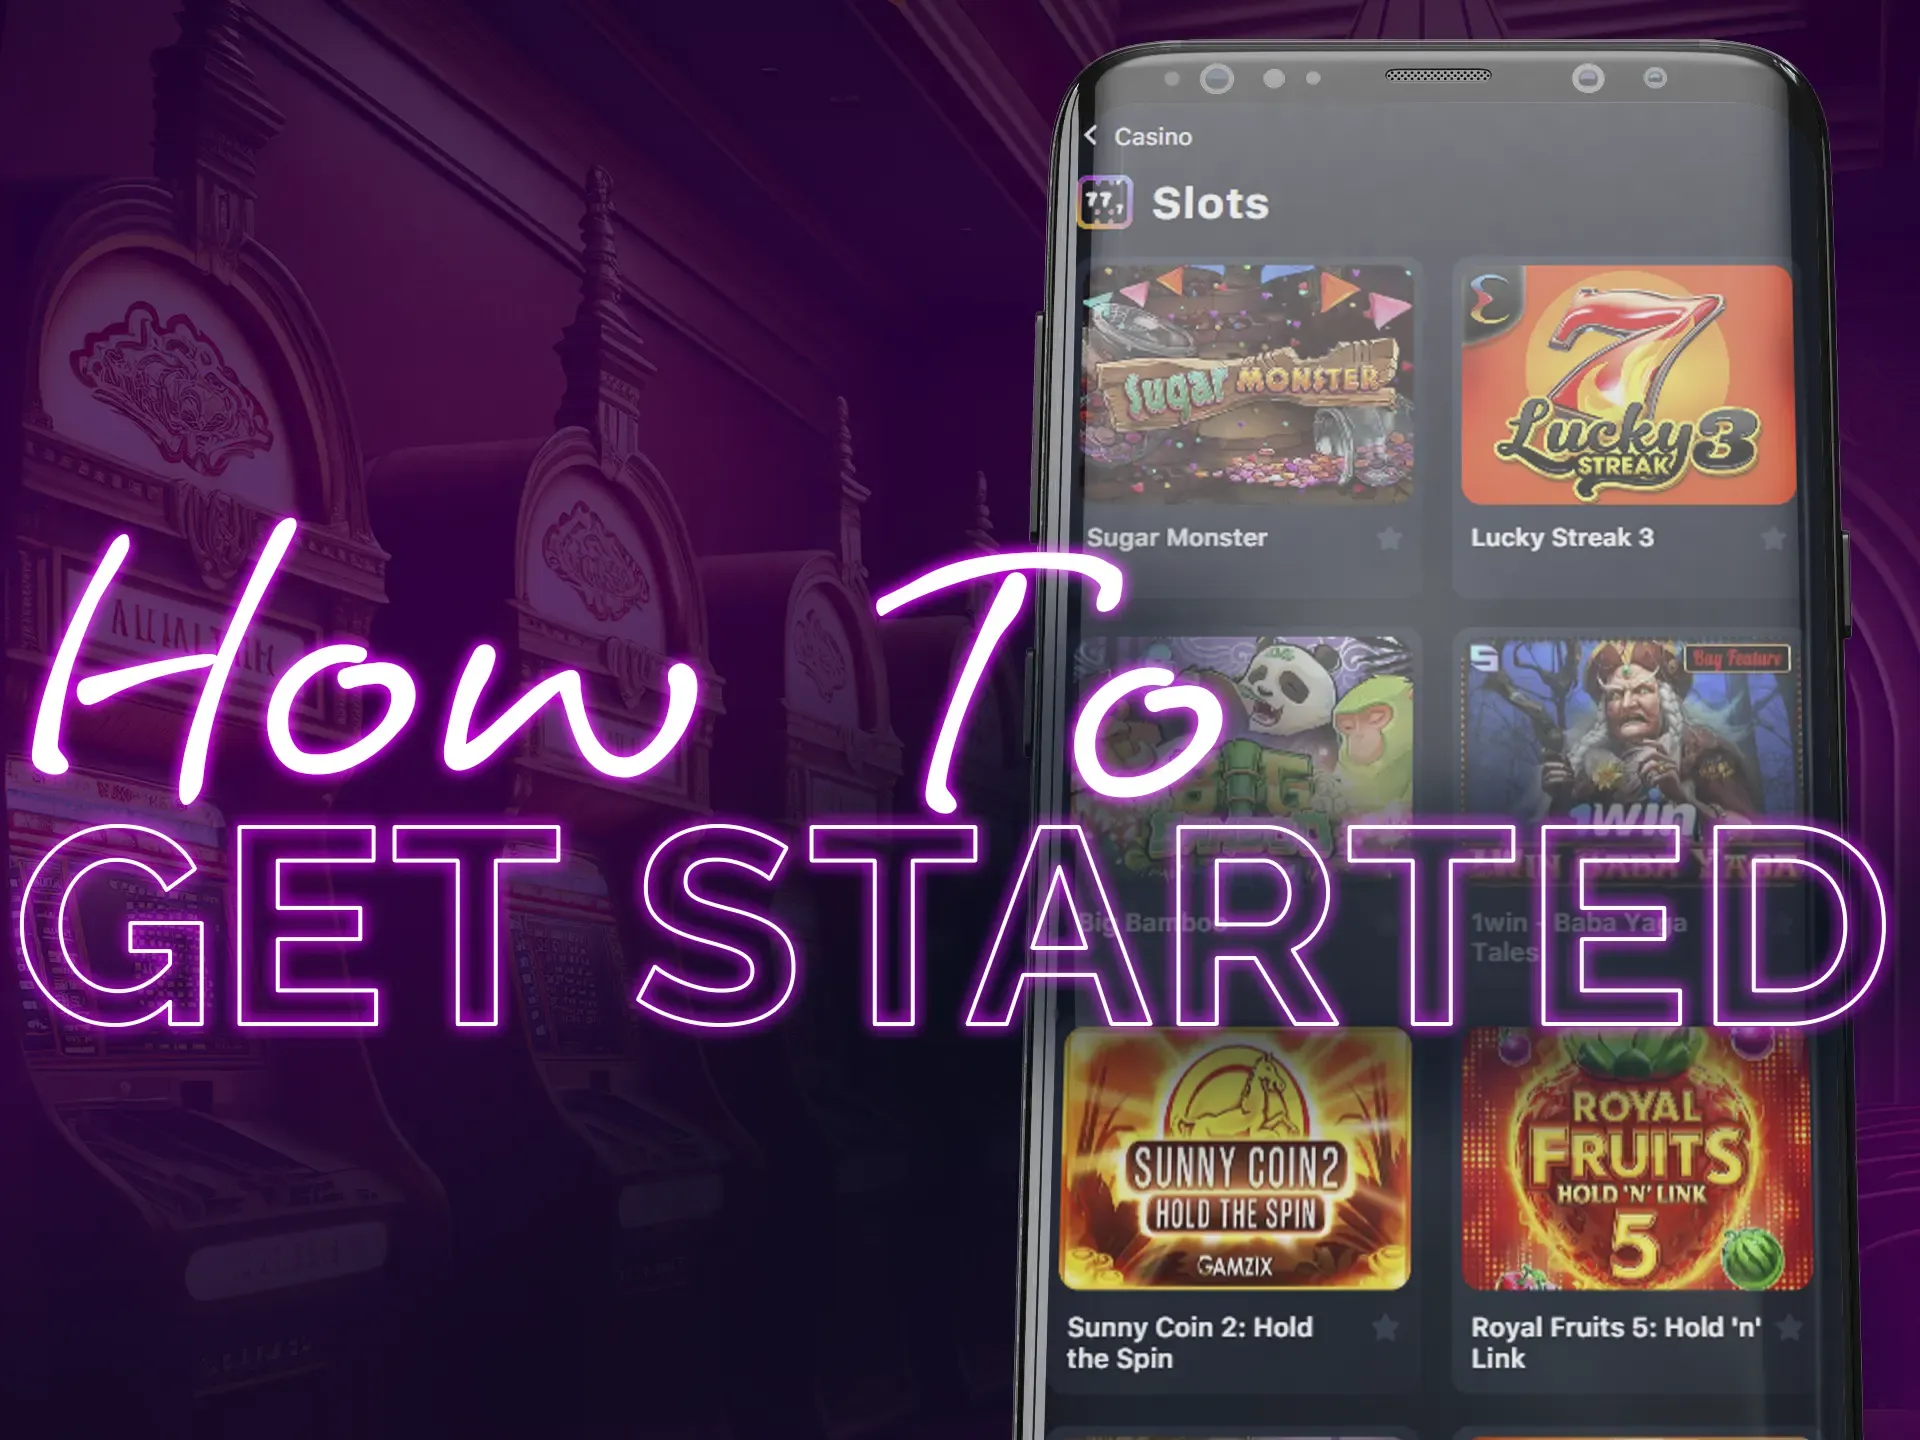 With this guide from Bestslots, learn how easy it is to get started playing slots.